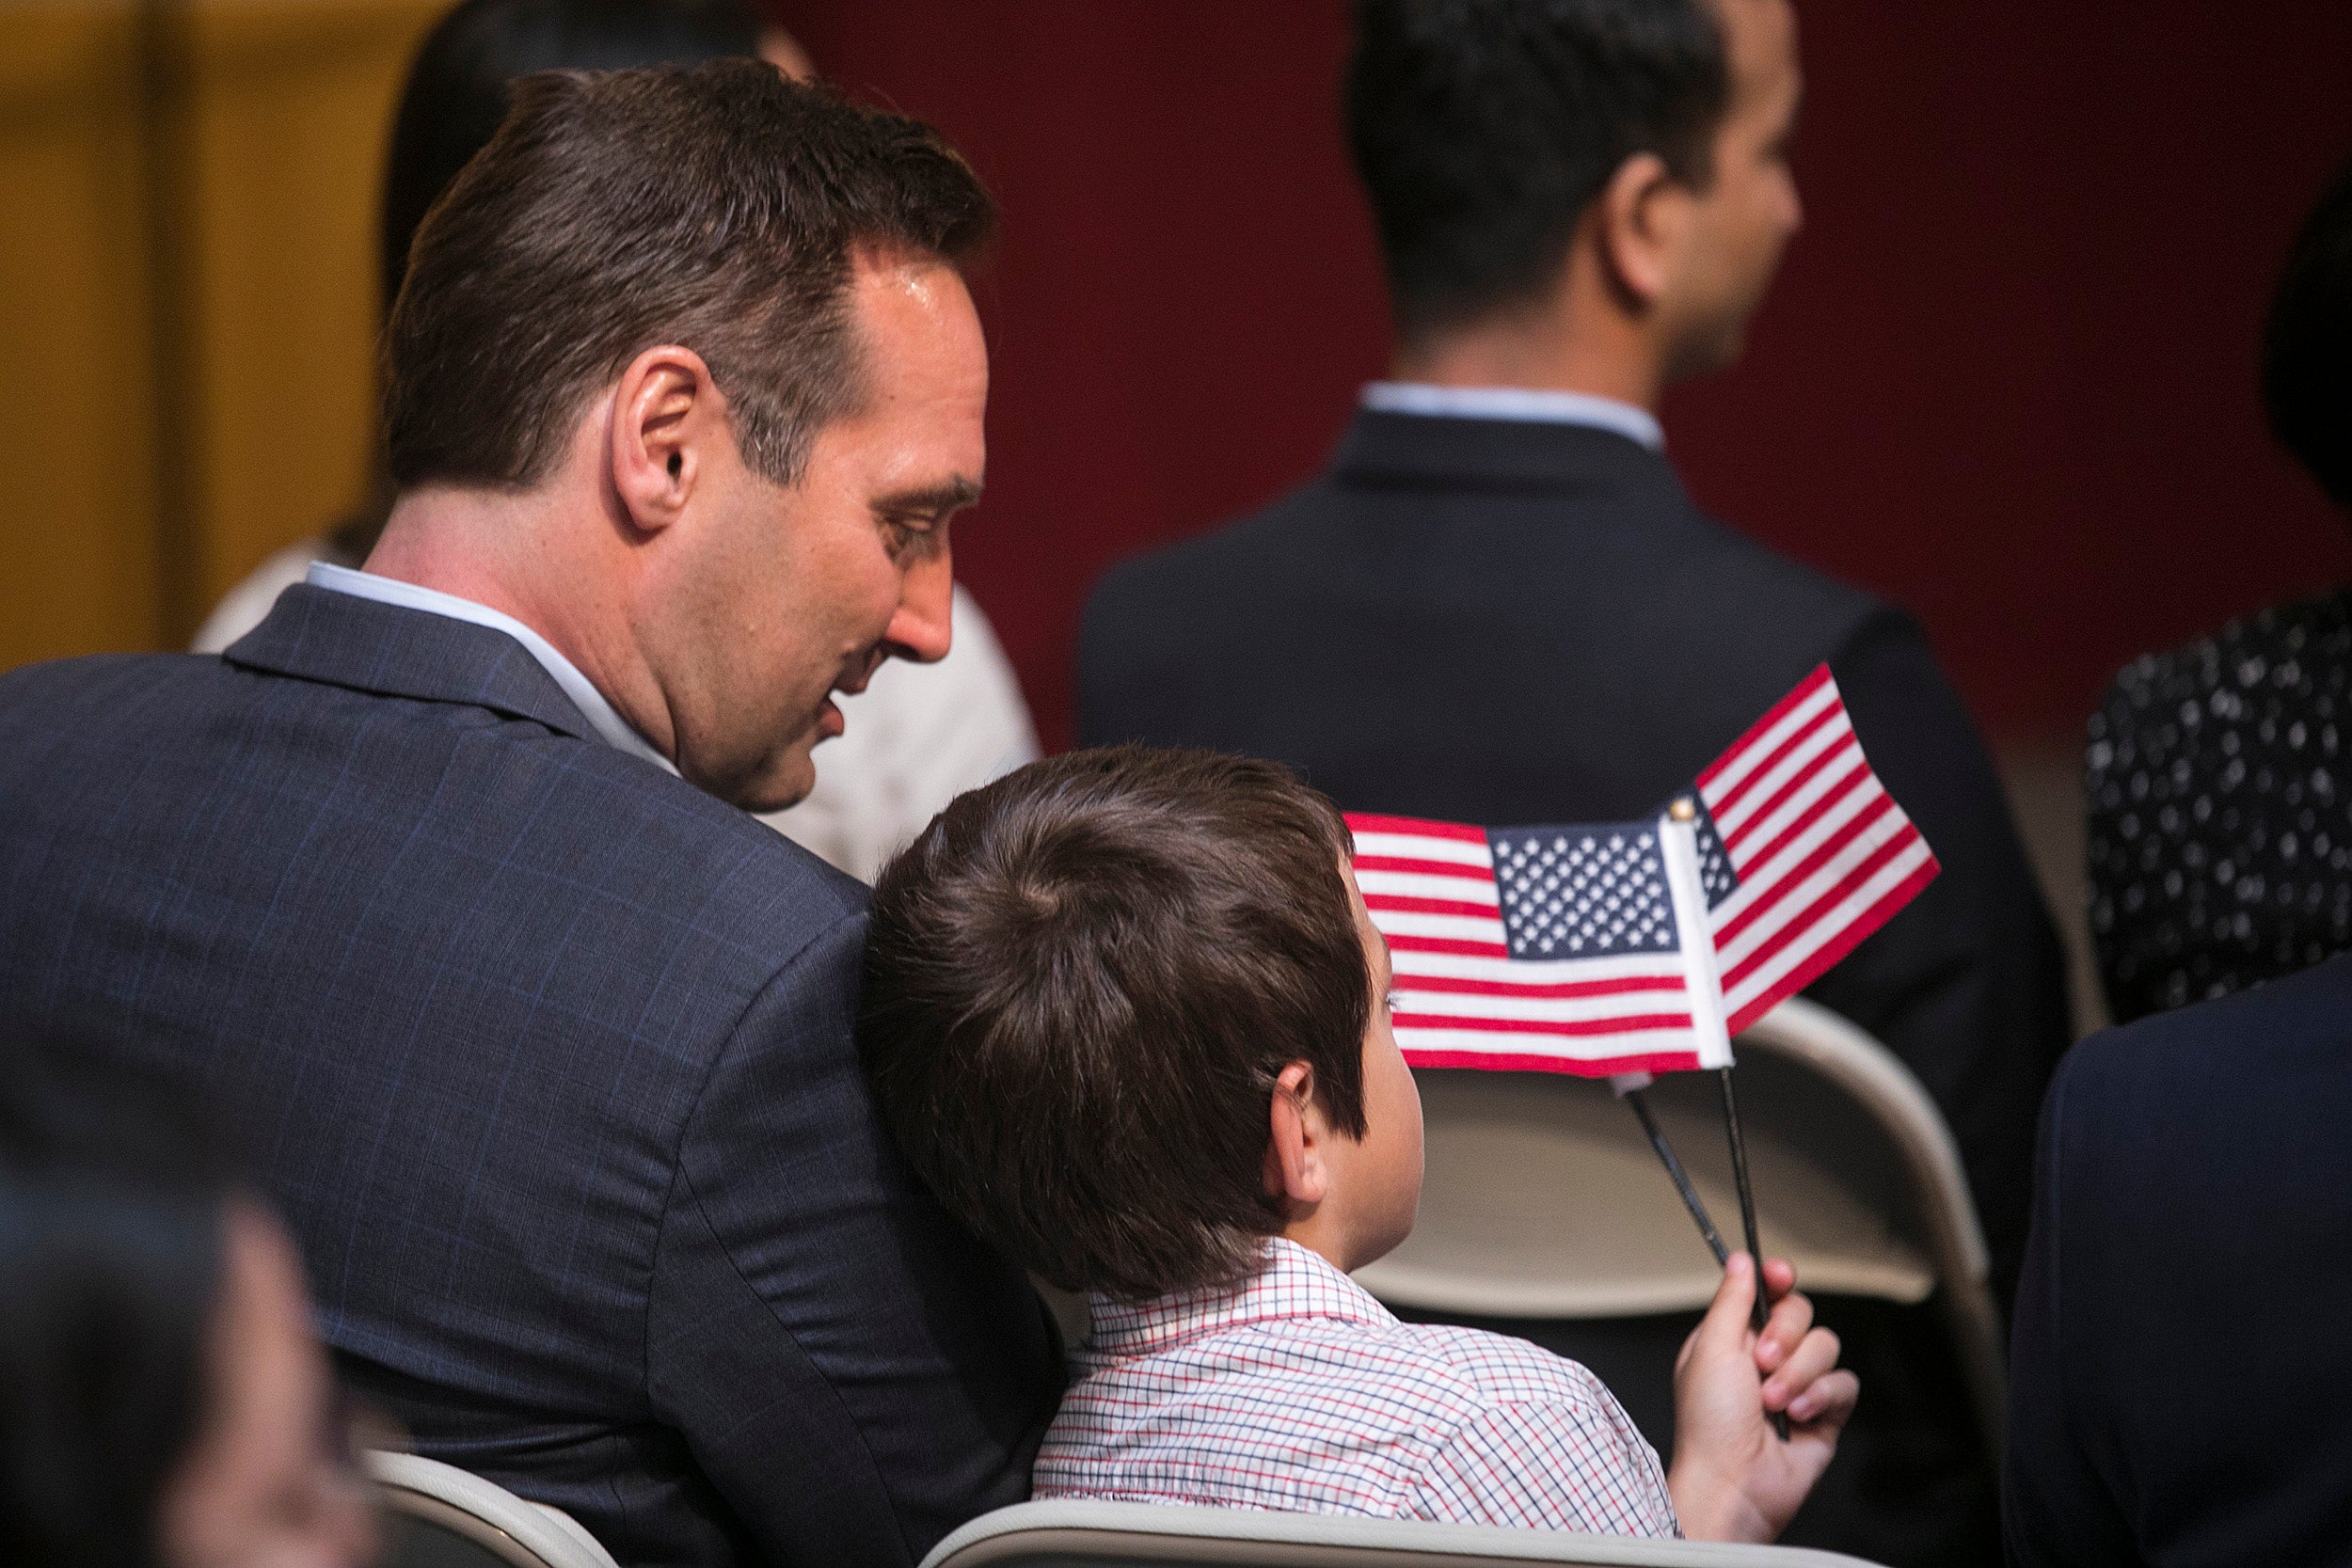 man sitting with son, holding American flag